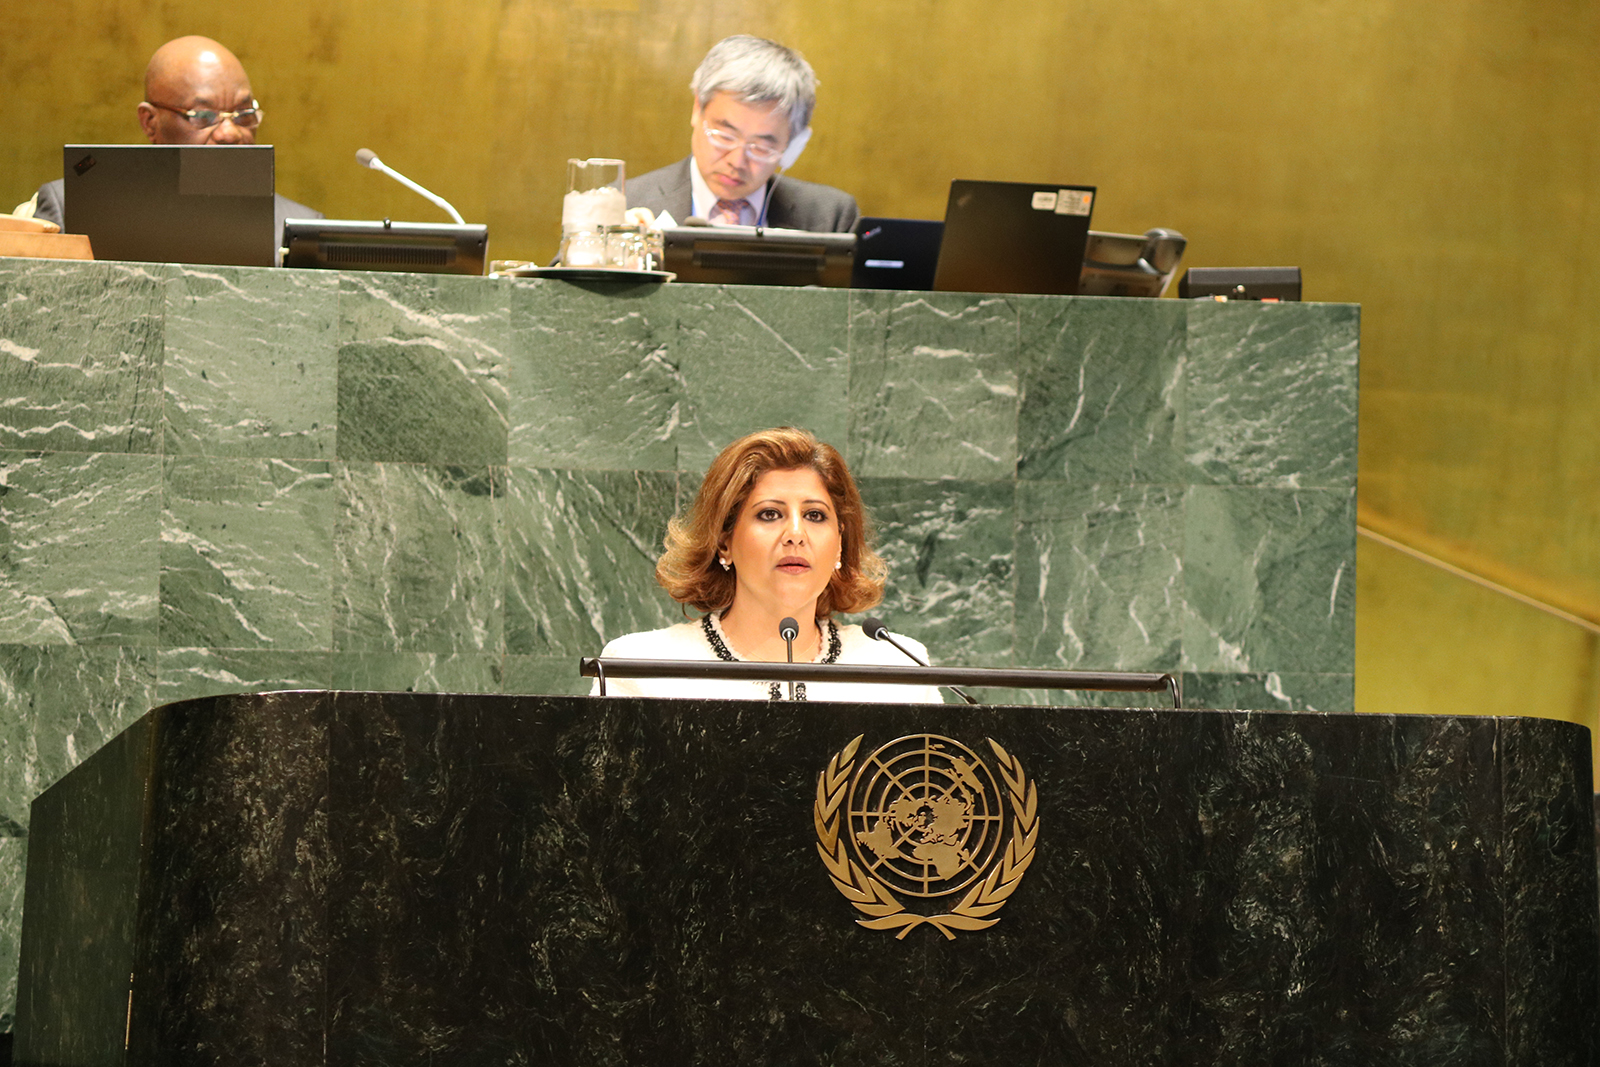 First Secretary in Kuwait's permanent mission to the UN during the discussion